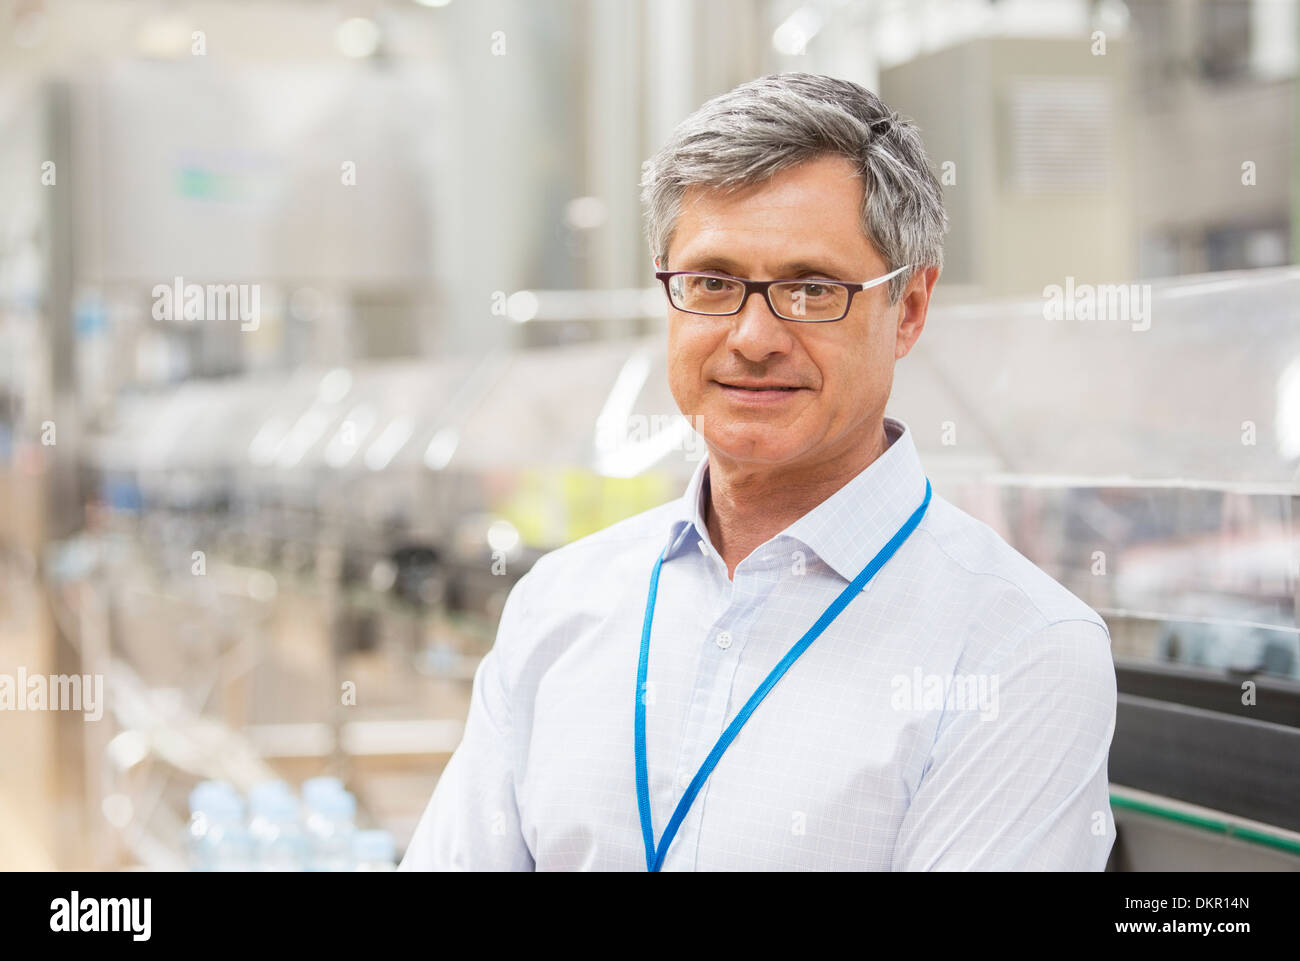 Businessman smiling in factory Stock Photo